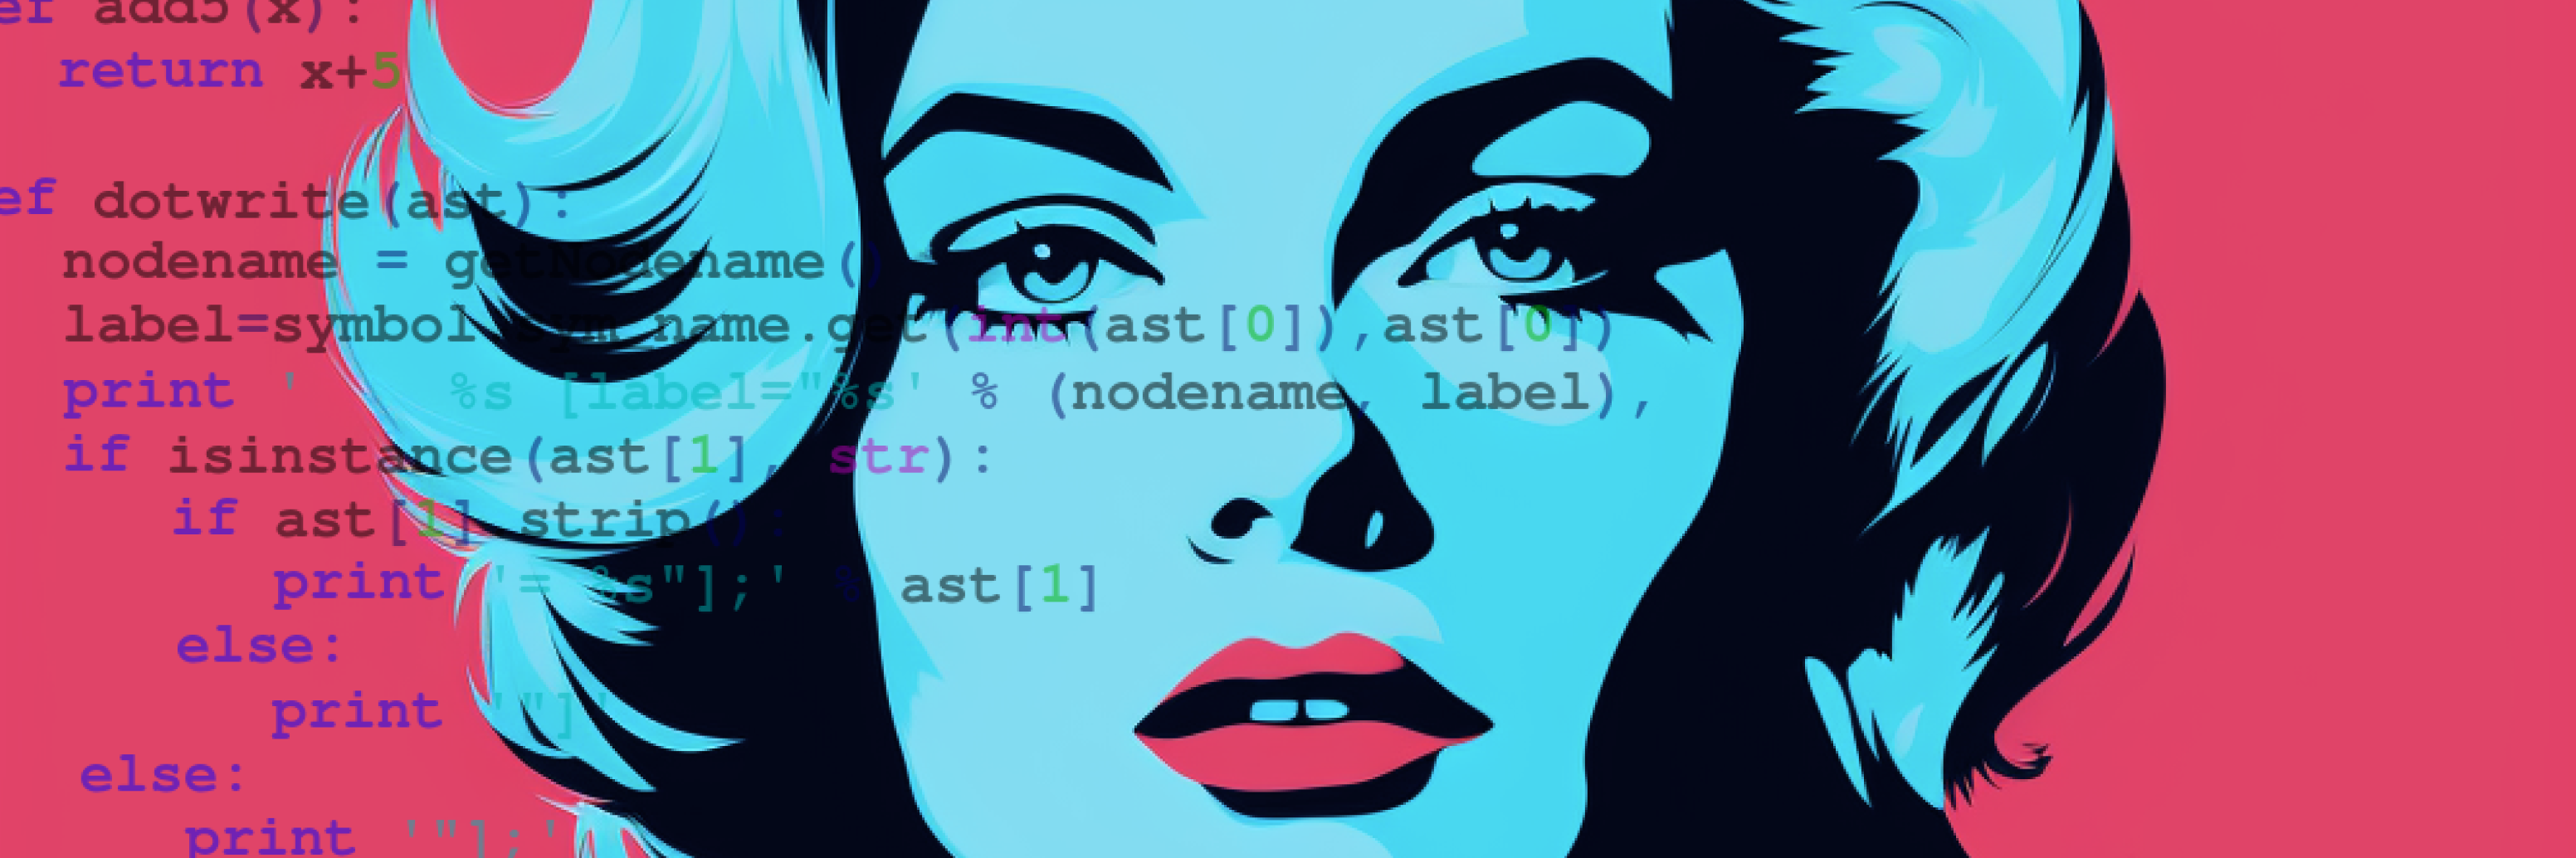 Image includes lines of code overlayed over a pop art style woman illustration